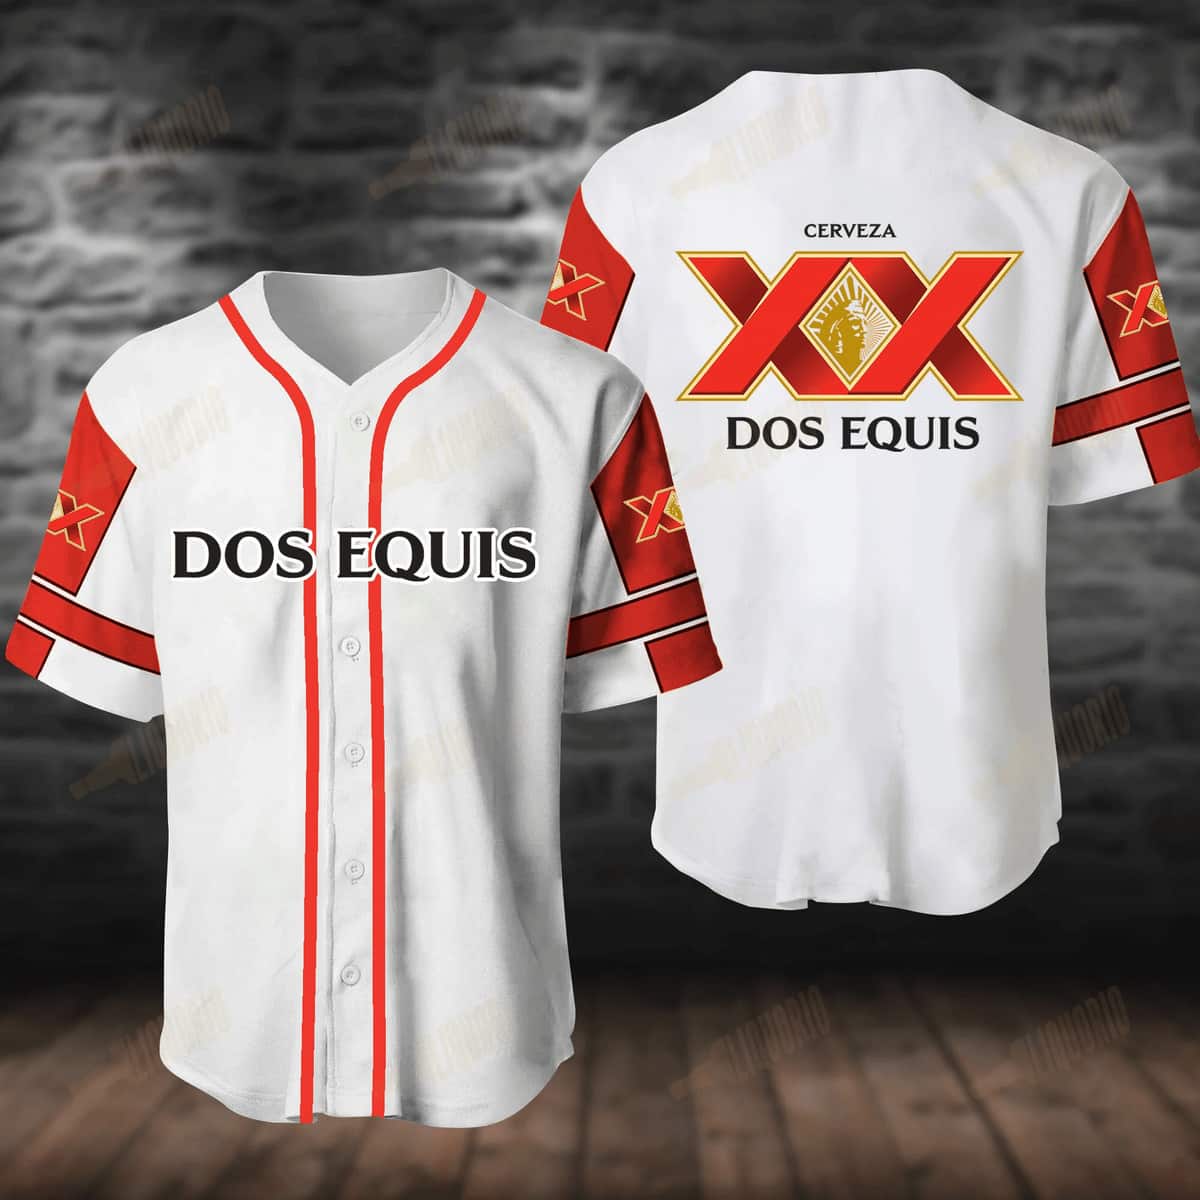 White Dos Equis Baseball Jersey Cerveza Beer Lovers Gift